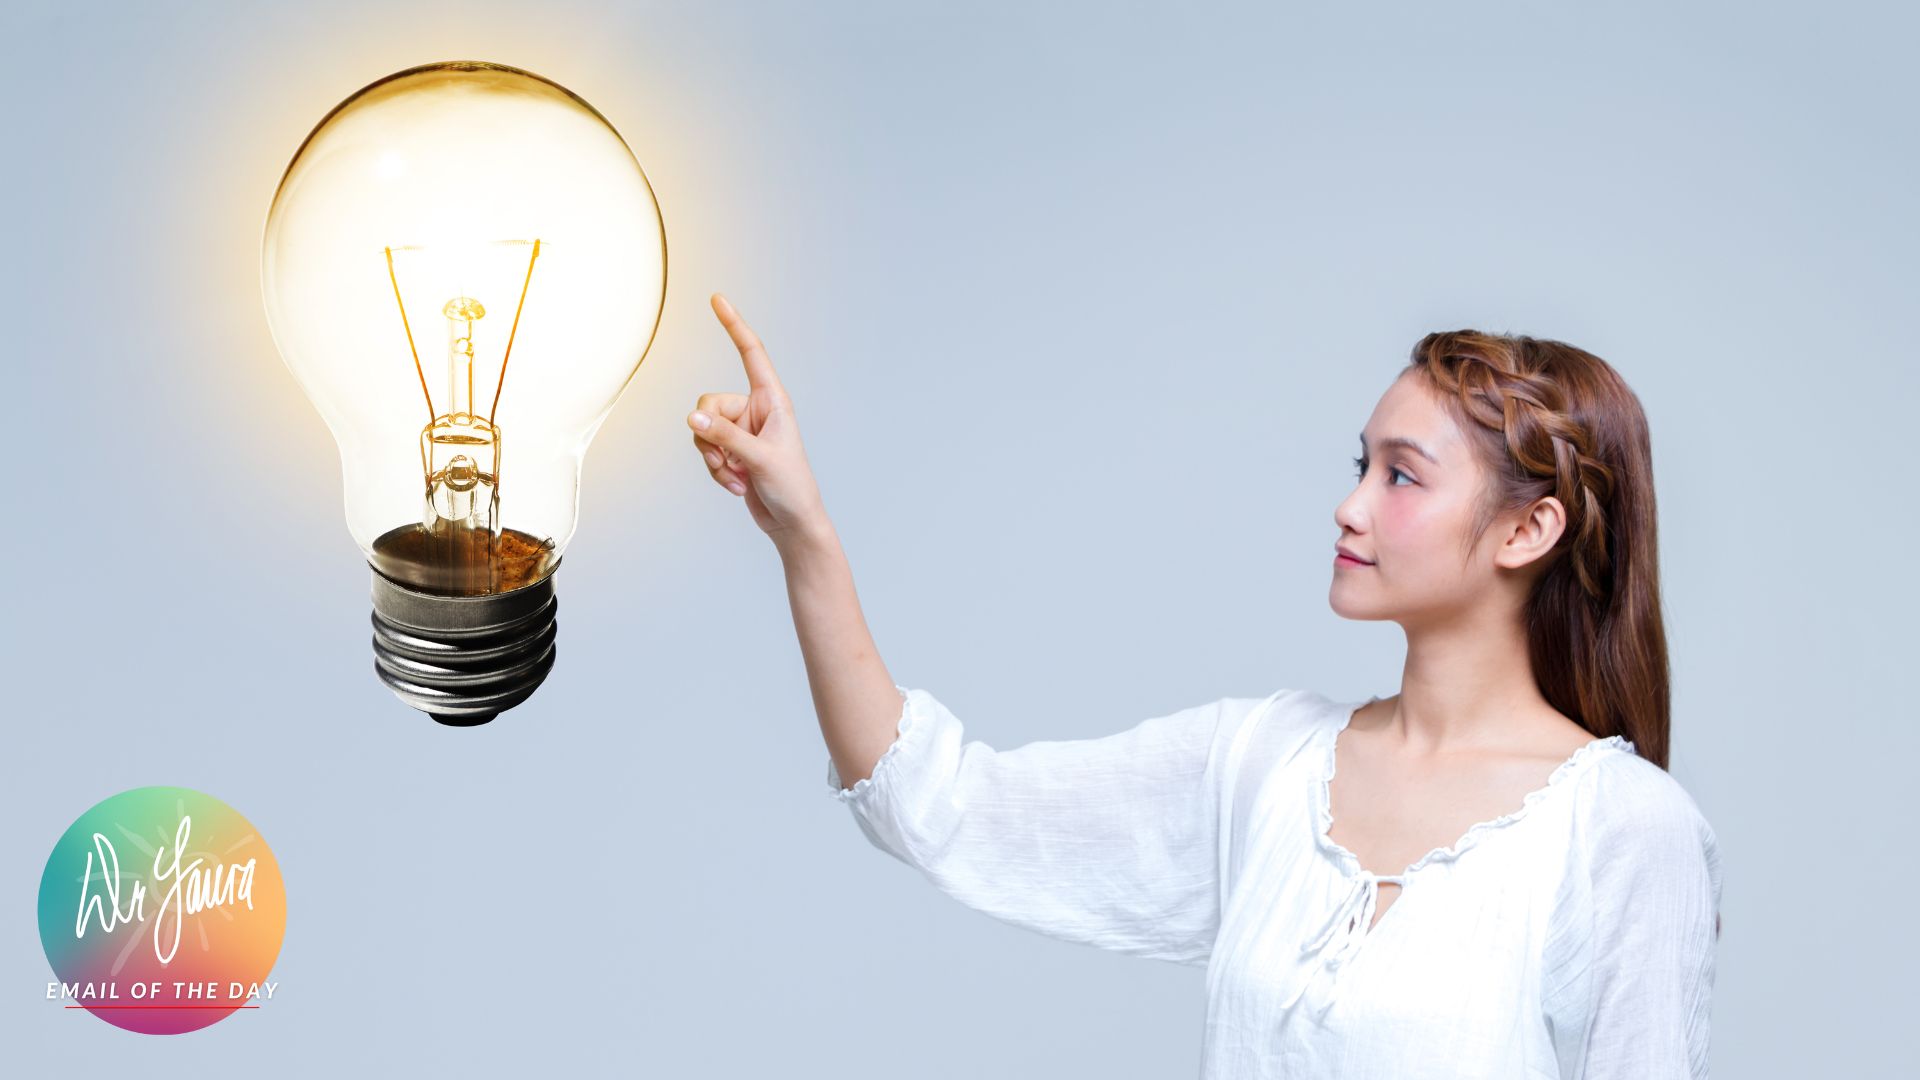 Woman touches large light bulb next to her